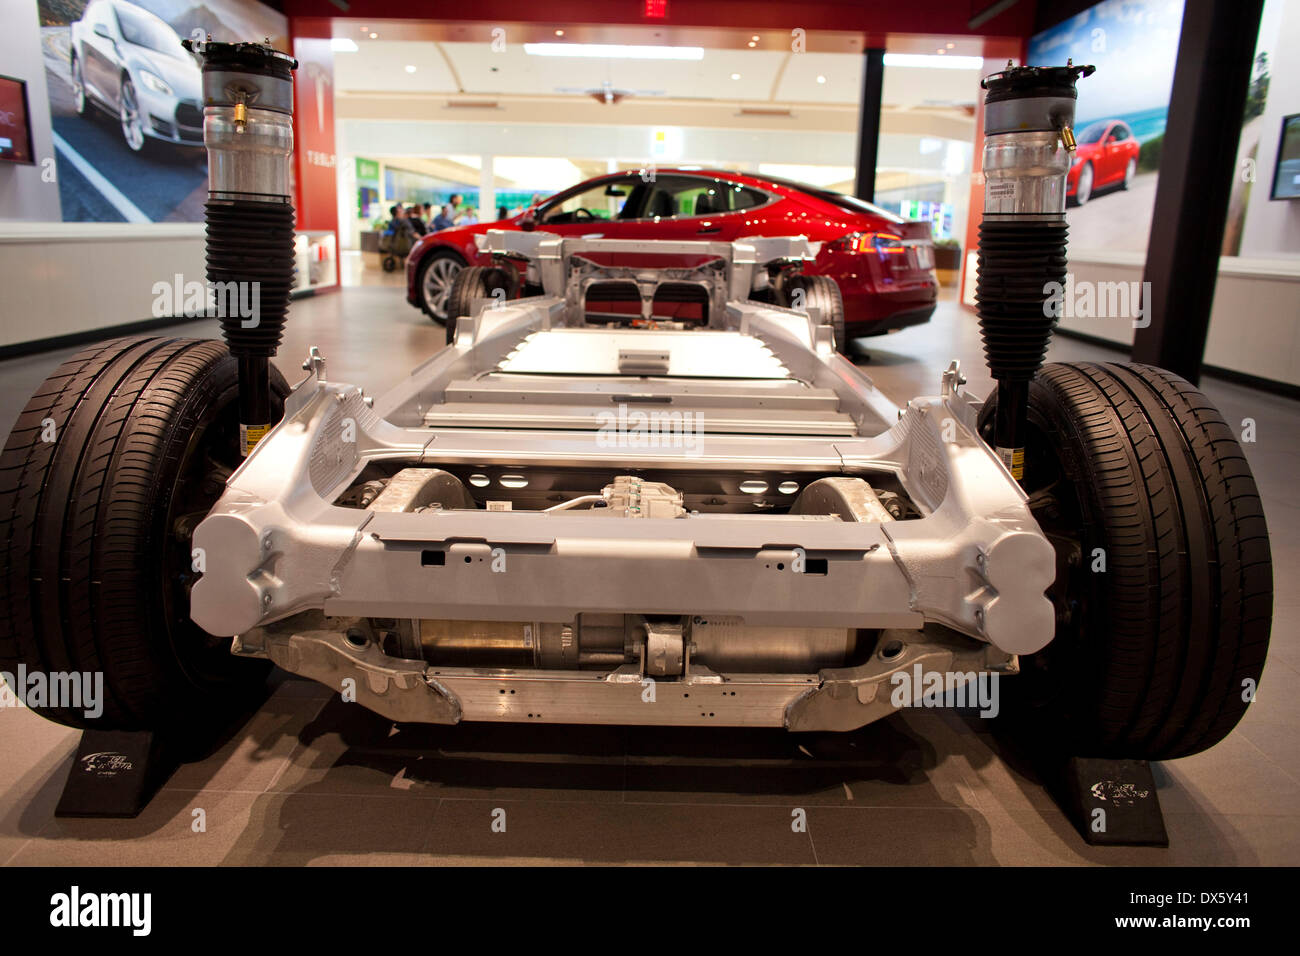 Mission Viejo, California, USA. 18th Mar, 2014. Tesla model S chassis and battery in the Mission Viejo mall showroom. Under a new law, Tesla Motors cannot sell cars directly to consumers in New Jersey effective April 1. Tesla has no existing franchised dealers with which its factory sales compete, and Tesla states that it is selling something so unique that an entirely different sales model is necessary. Credit:  ZUMA Press, Inc./Alamy Live News Stock Photo